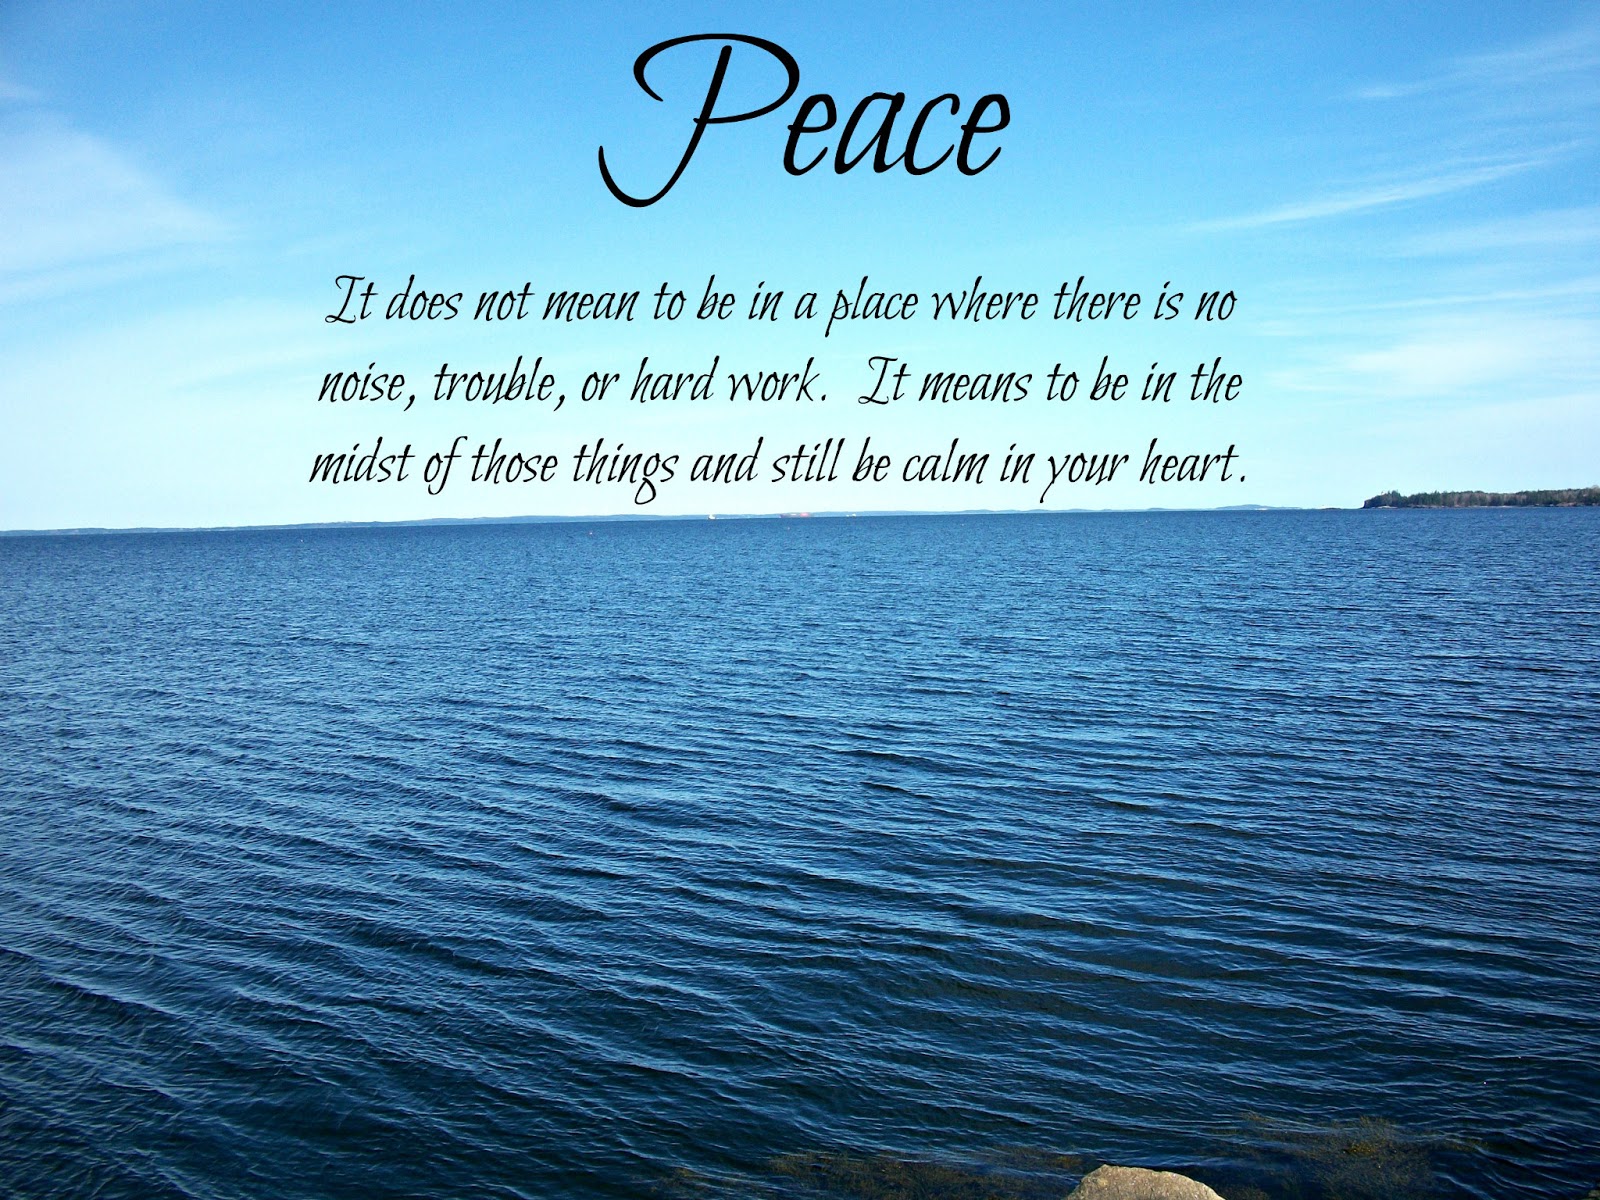 30 PEACE BRINGING QUOTES TO THE WORLD. 